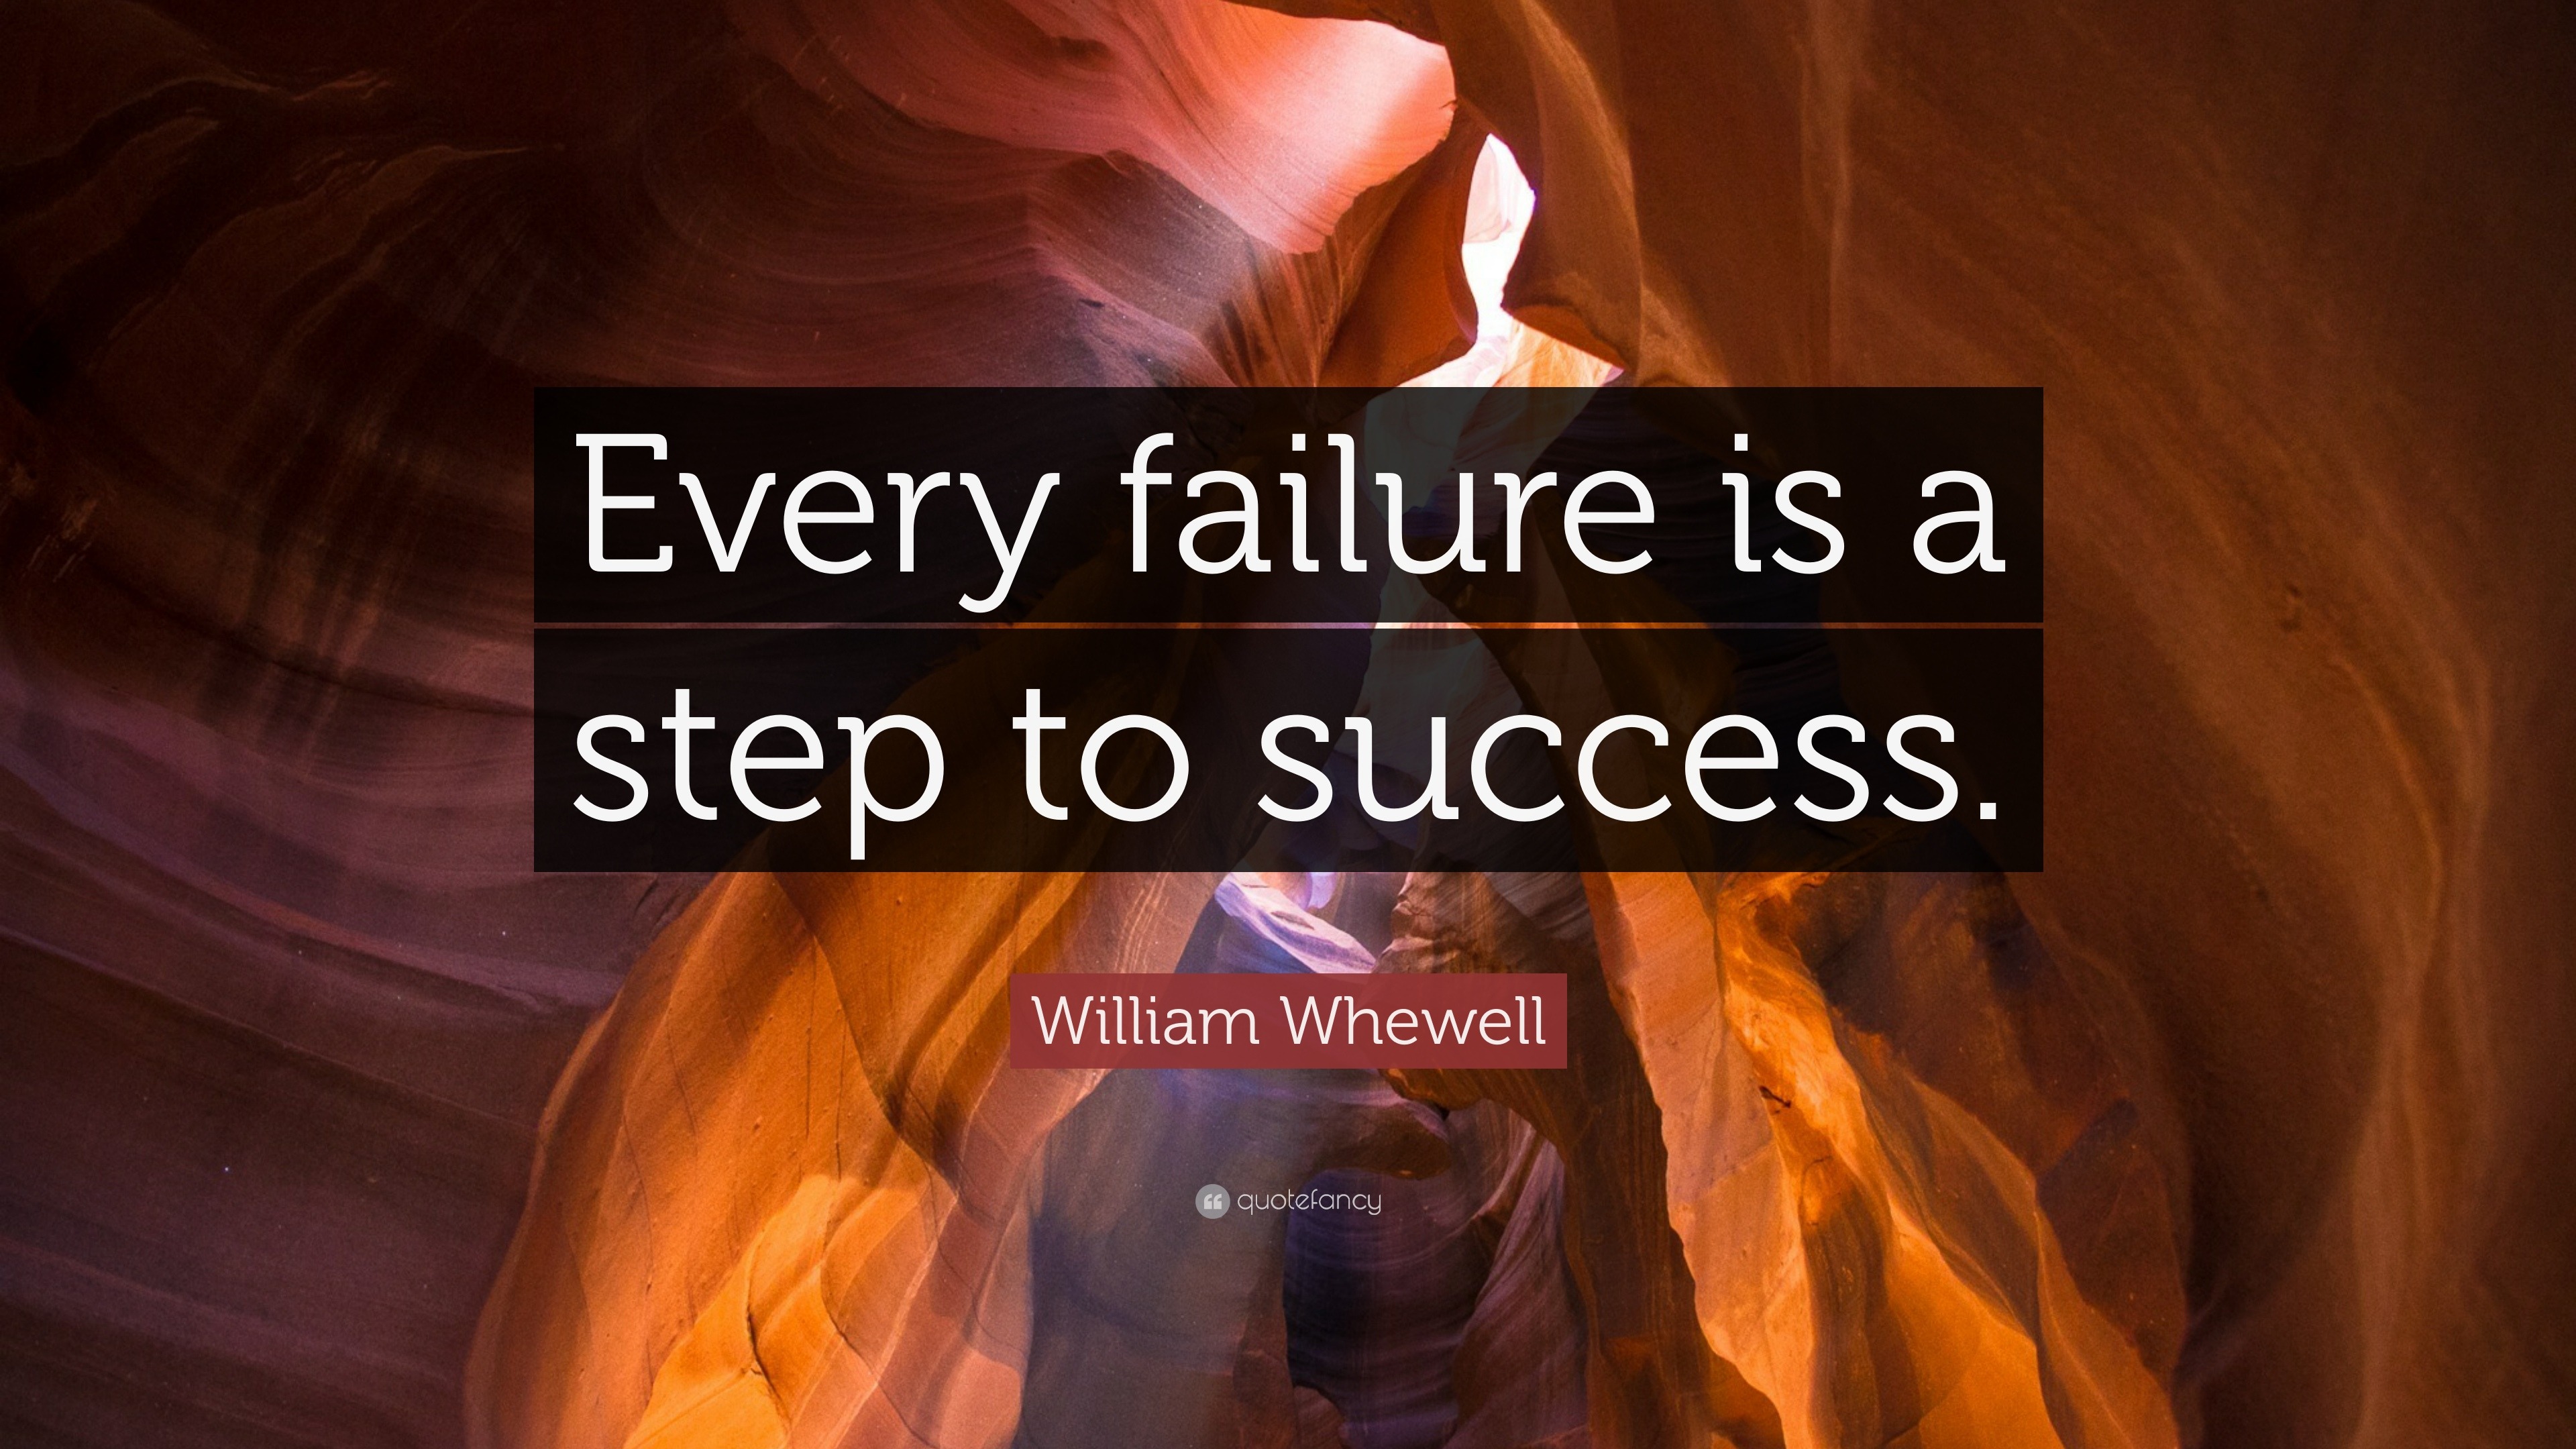 William Whewell Quote “Every failure is a step to success.”